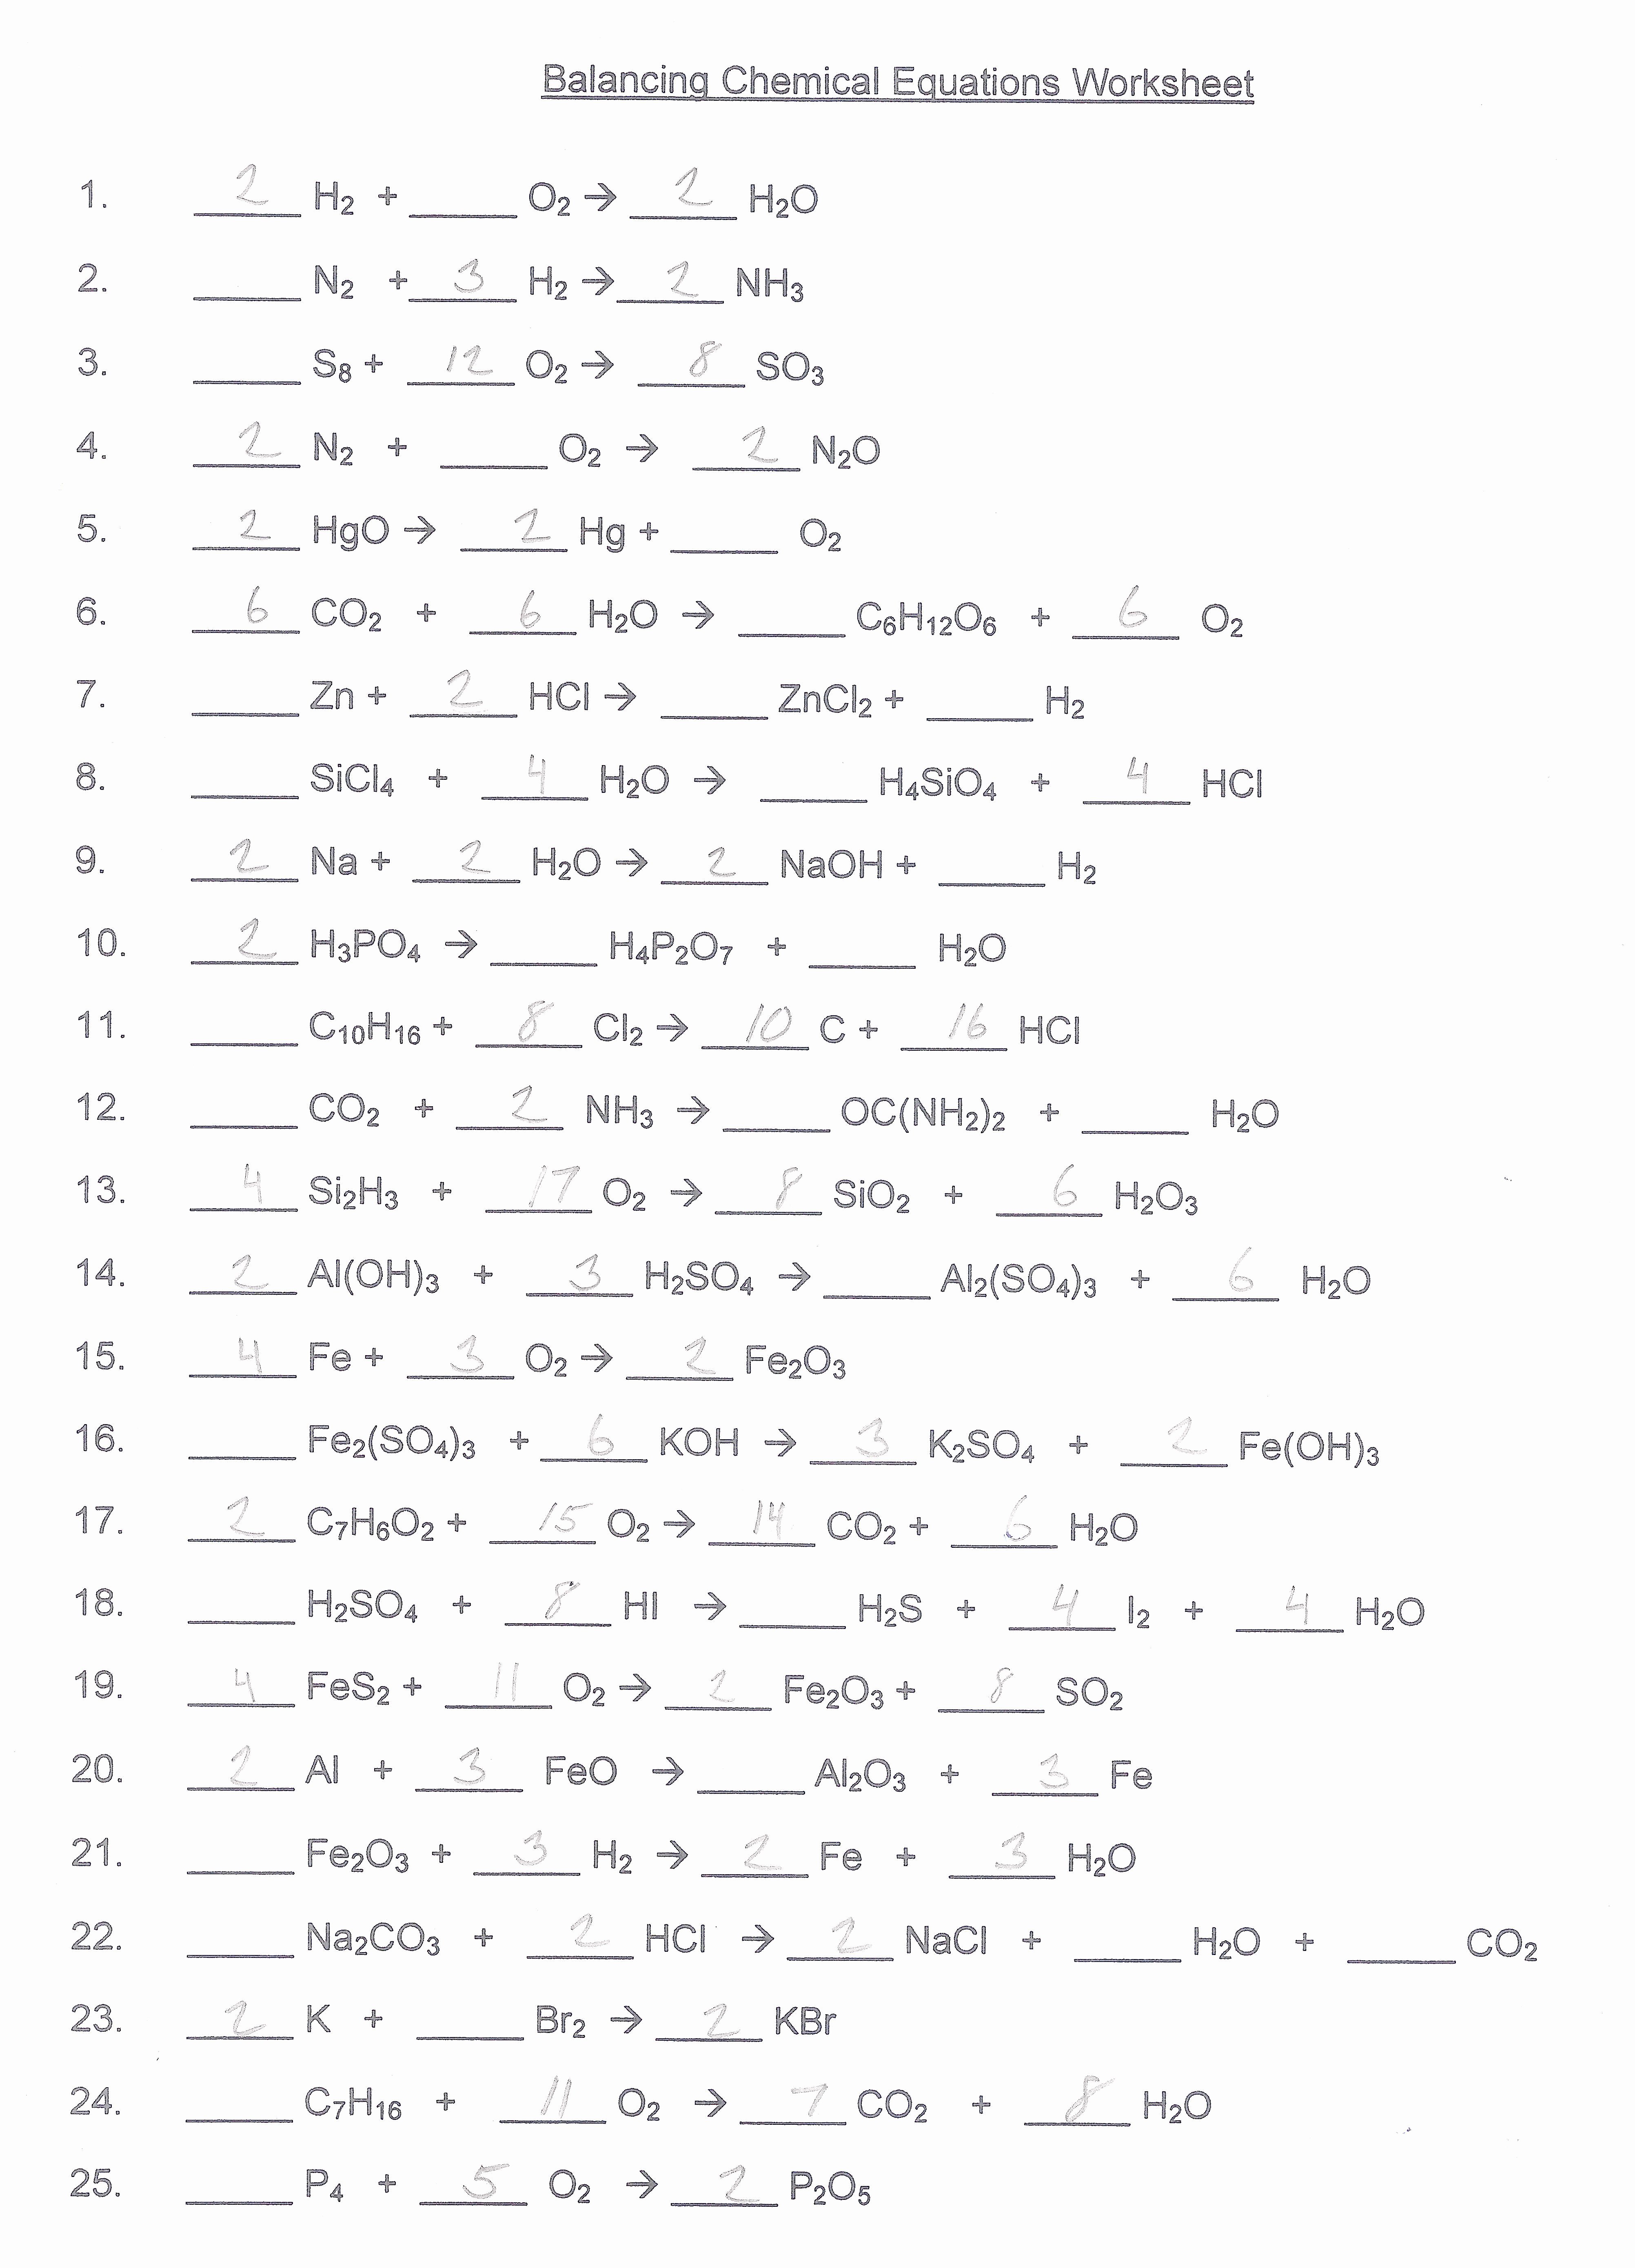 Chemistry Review Worksheet Answers Best Of Balancing Chemical Equations Worksheet Answer Key